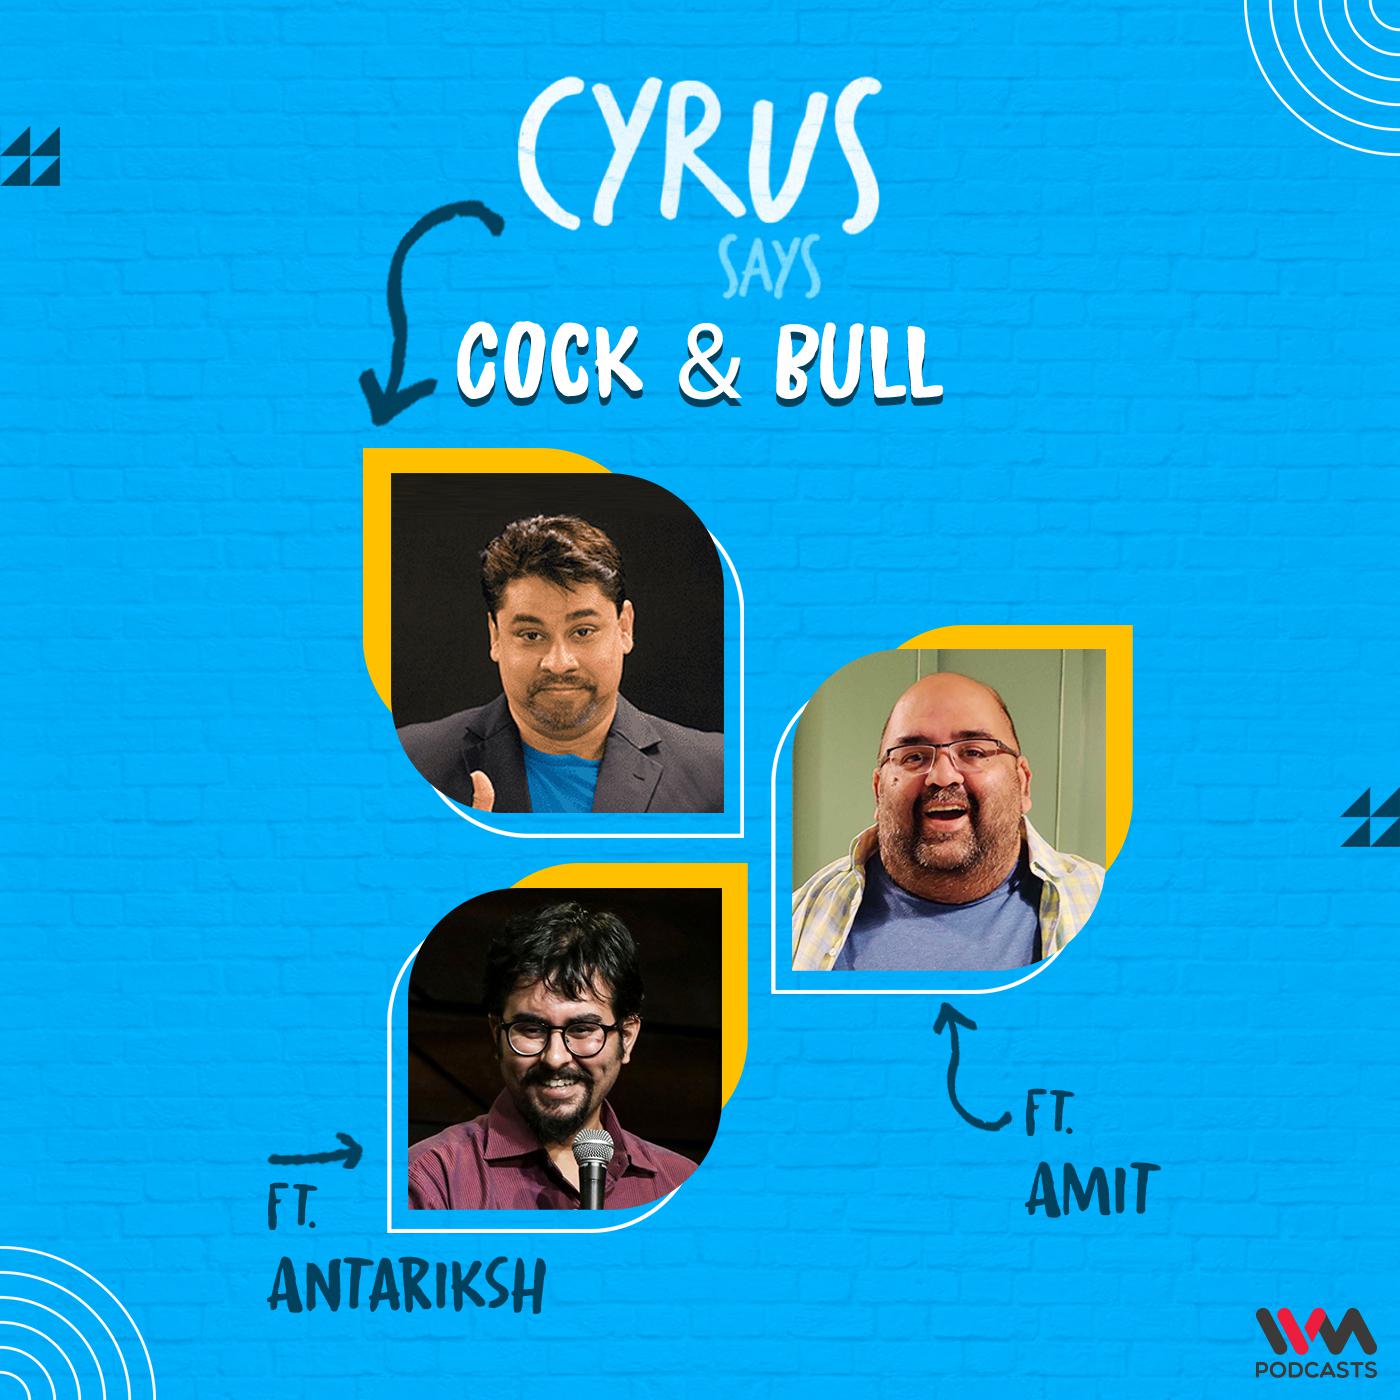 Cock & Bull feat. Amit and Antariksh | Boris Johnson's COVID Parties, High Pitched Voices, Billboard Prank Calls